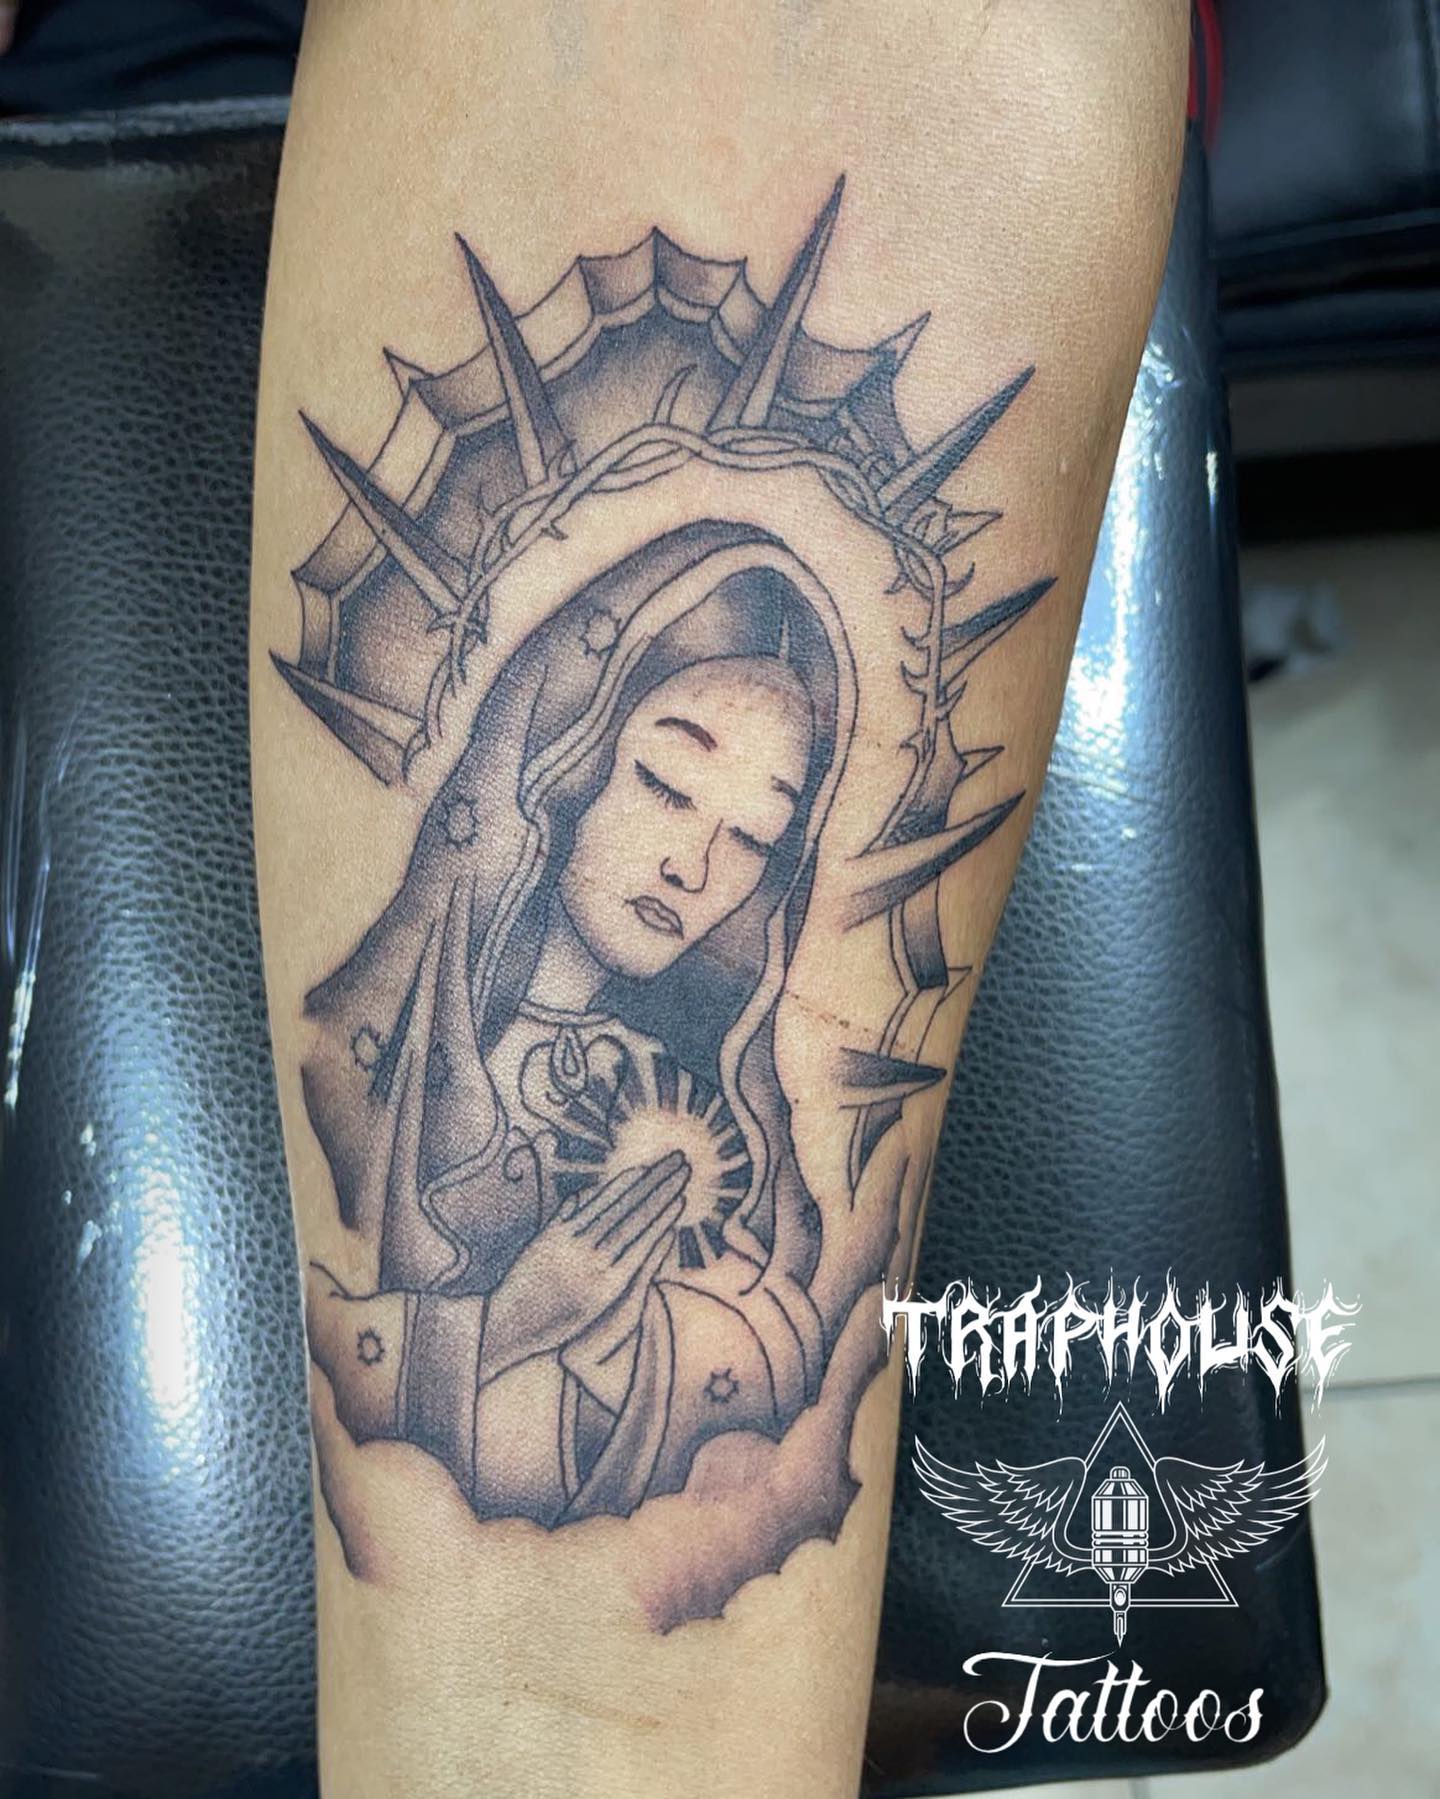 Our Lady of Guadalupeshin bangerOUCHY tattoo tattoos  traditionaltattoo traditionaltattoos neotradition  Tattoos  Traditional tattoo Tattoo coverup